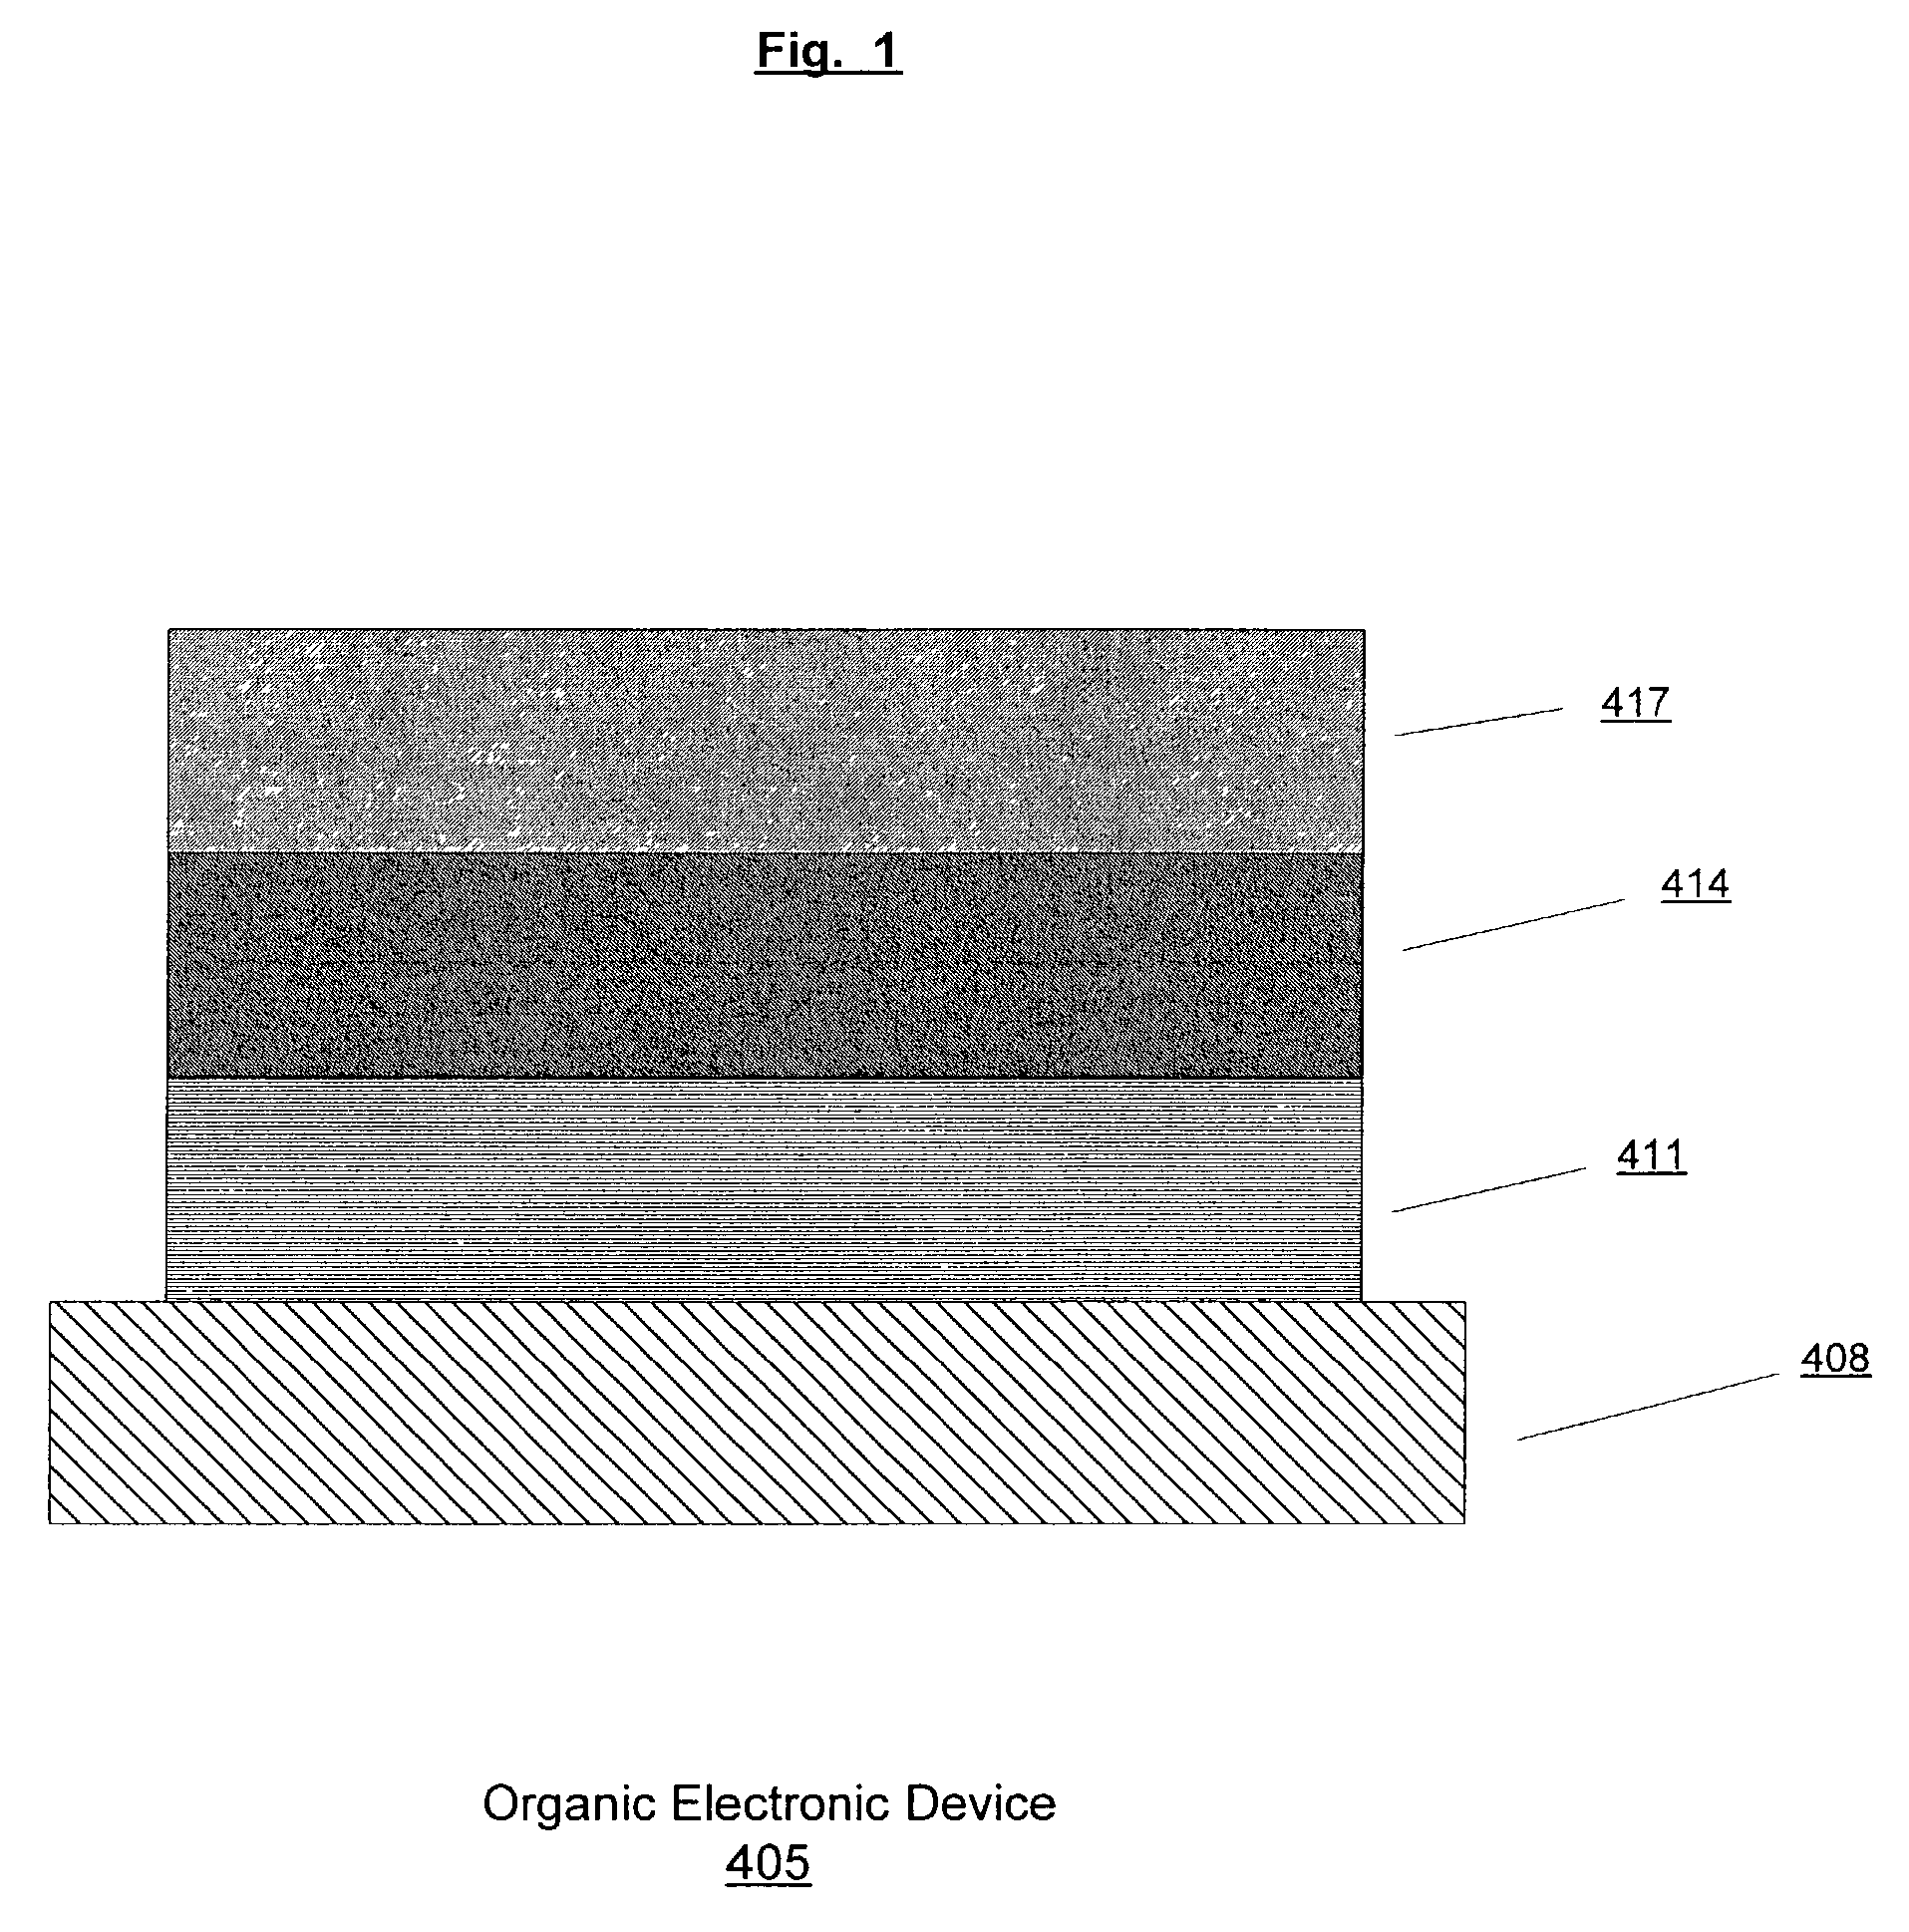 Electroluminescent devices and method of making transparent cathodes